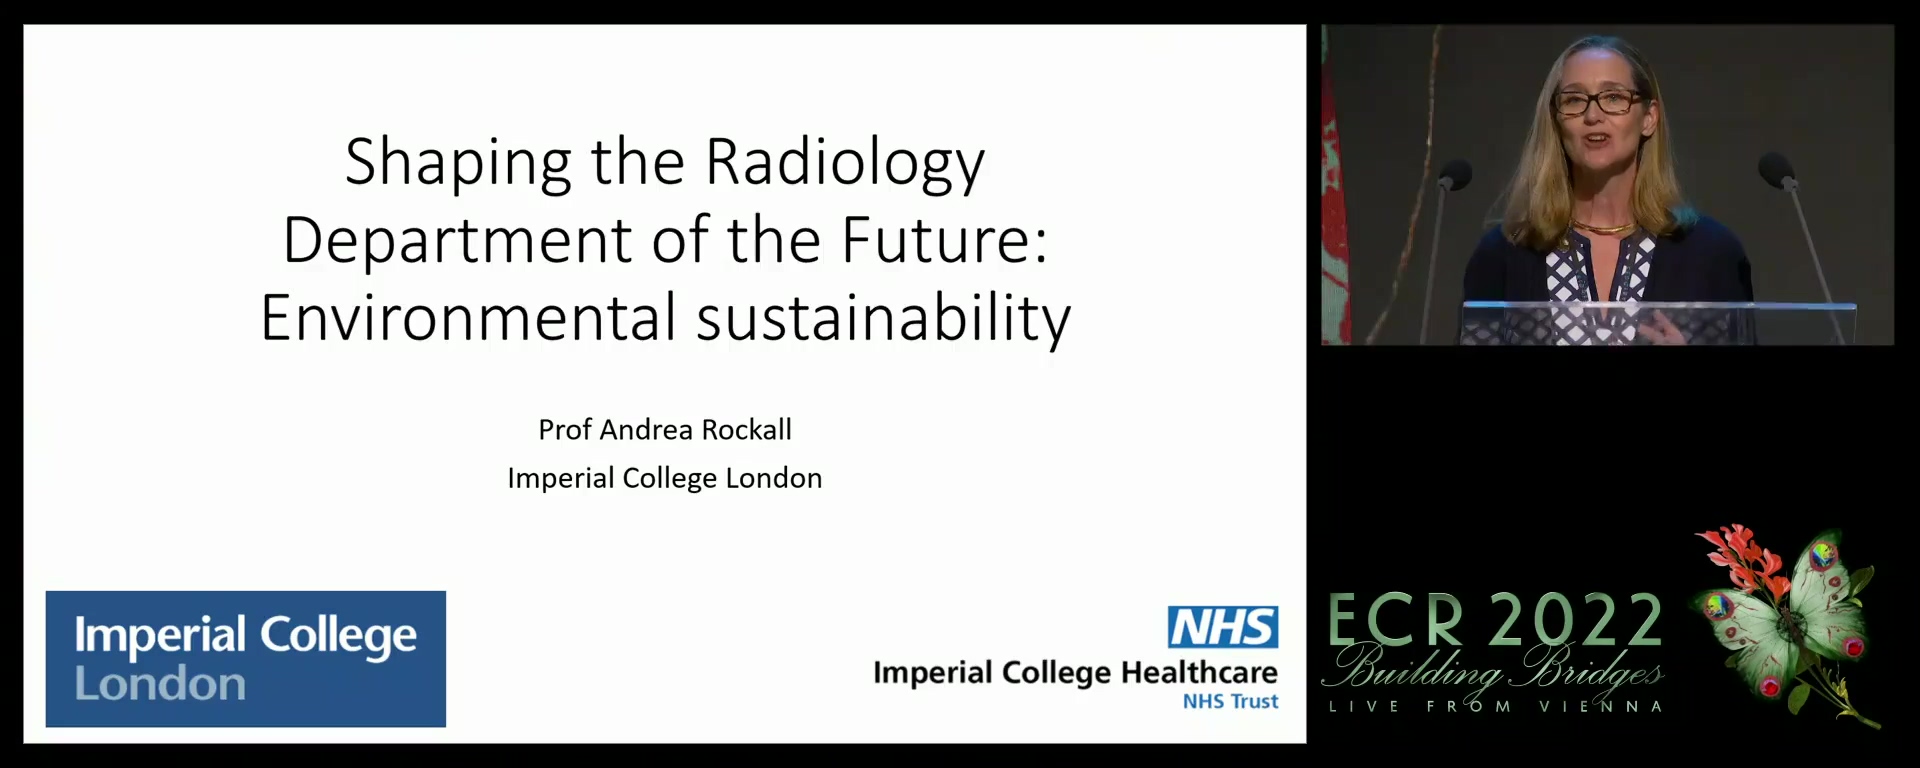 Shaping the radiology department of the future: environmental sustainability